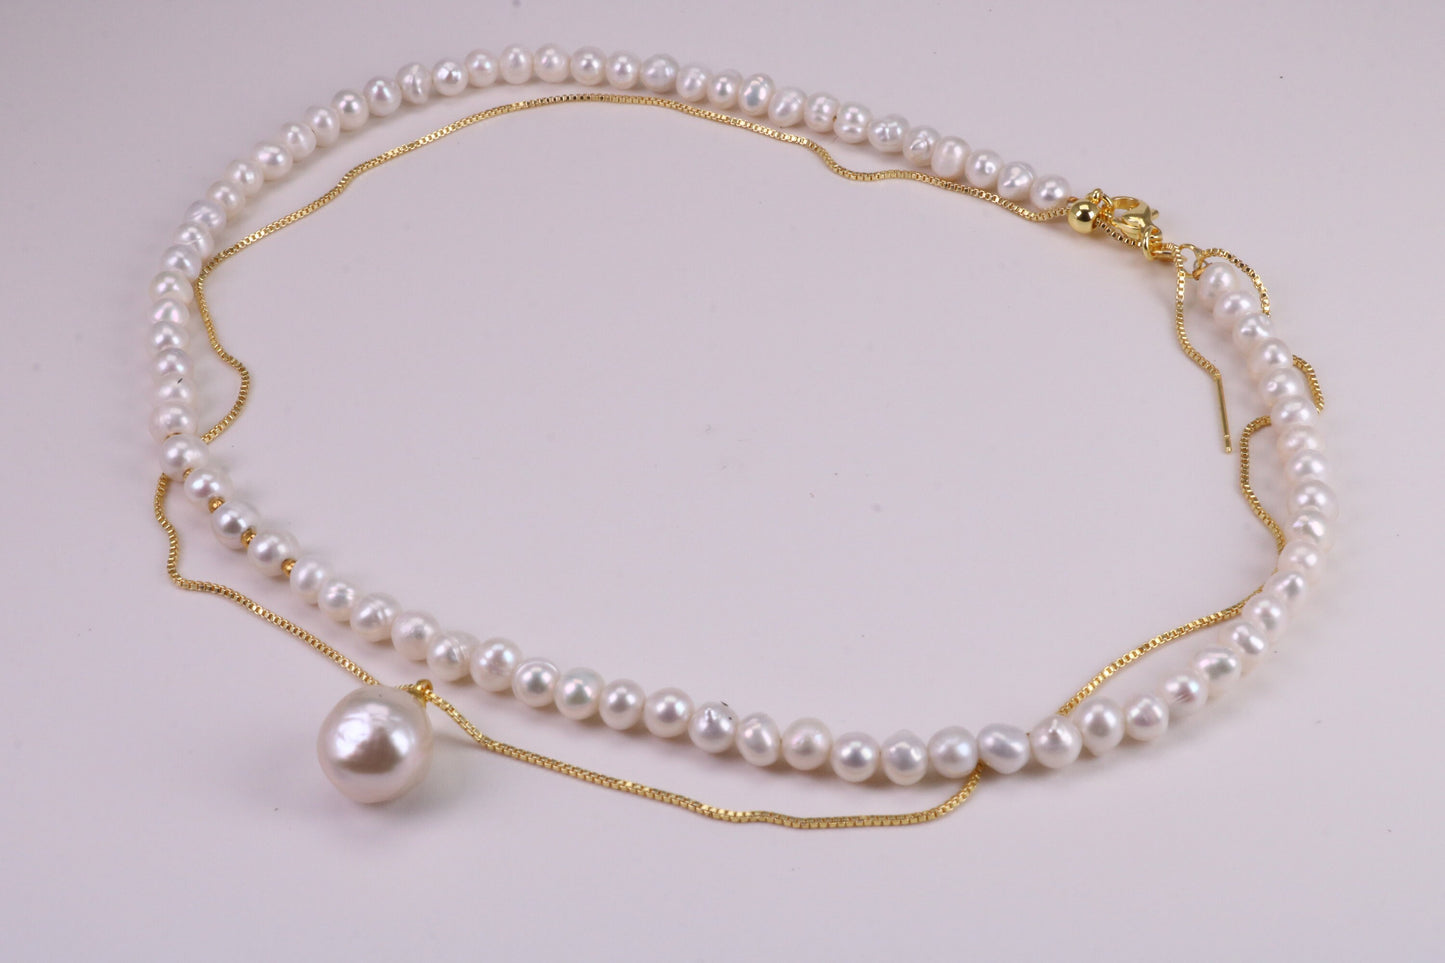 Single Strand Natural 8 mm Round Pearl Necklace with Single Pearl Pendant Chain set in Silver and 18ct Yellow Gold Plated